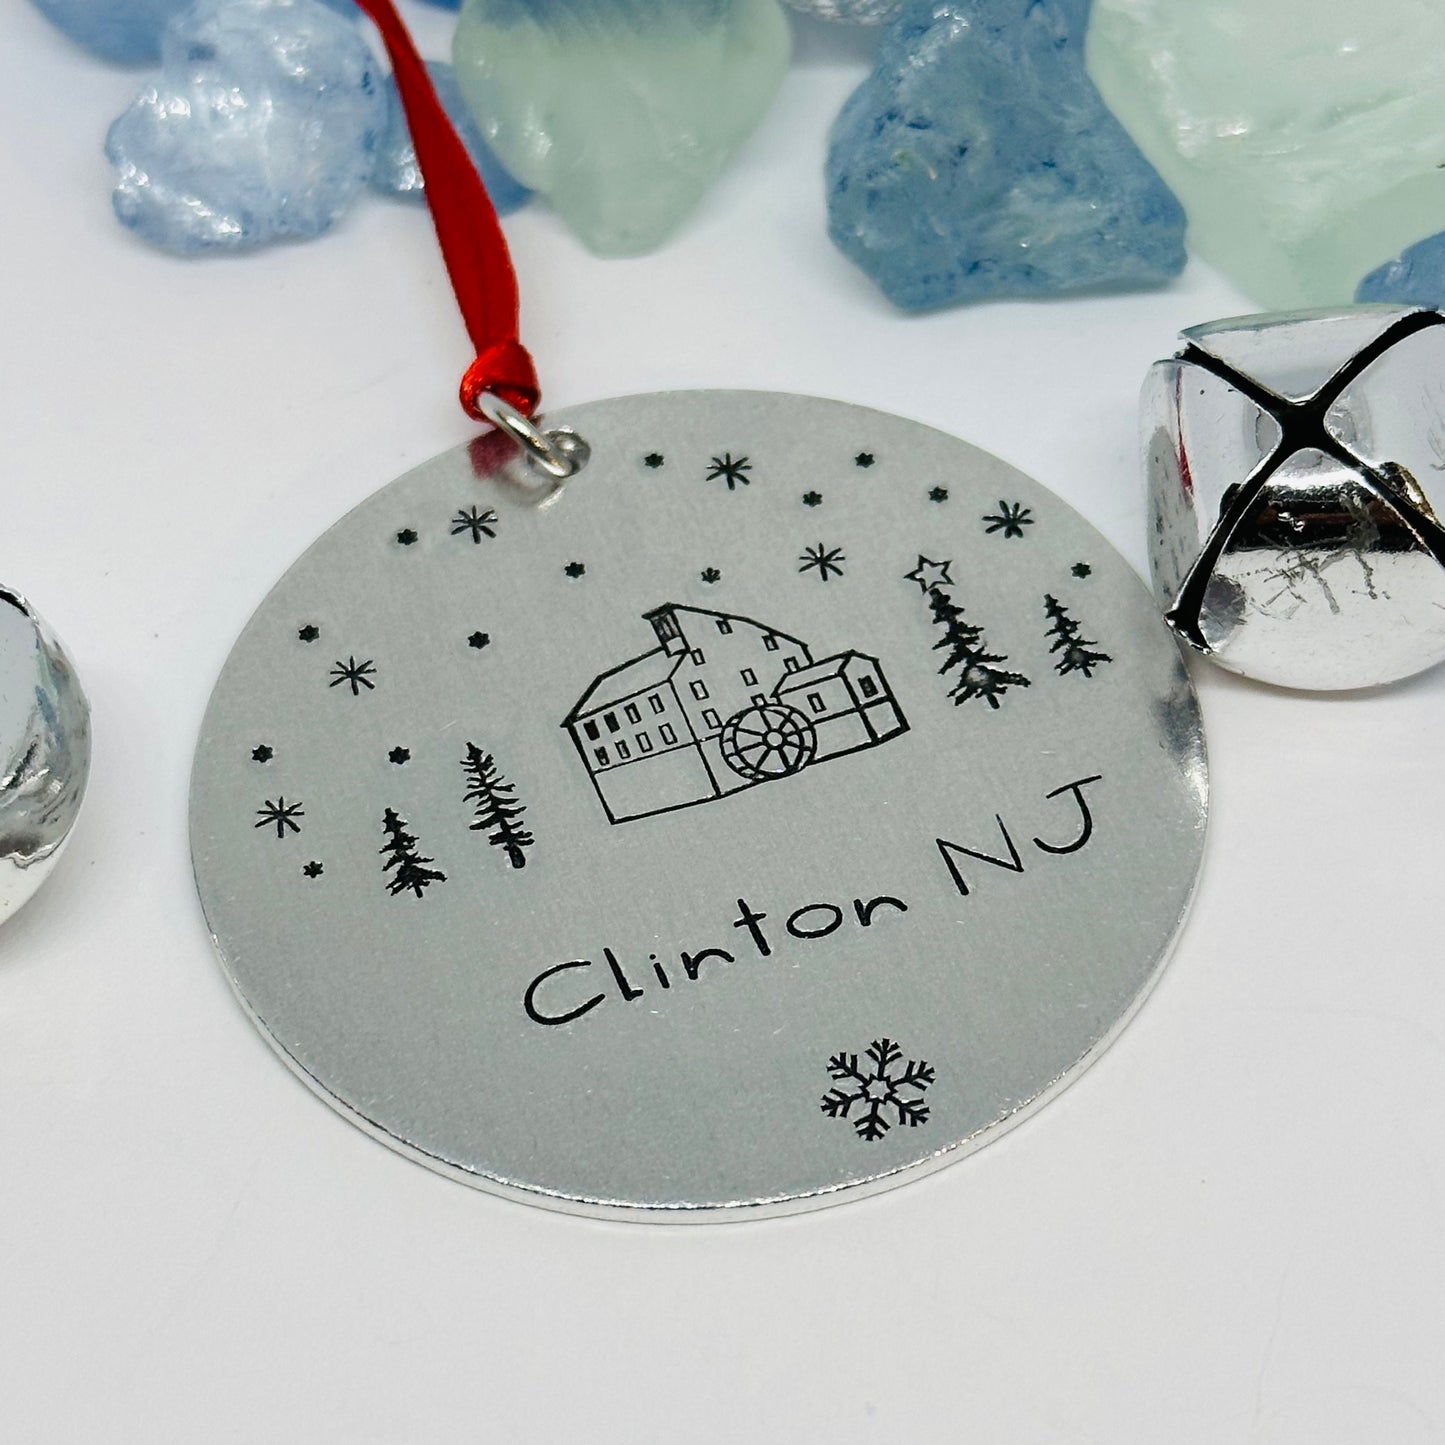 Grist Mill Hand Stamped Ornament | Clinton NJ Red Mill Museum Aluminum Round Ornament | Christmas | Hand Crafted Tree Decor | Holiday Decoration 2022